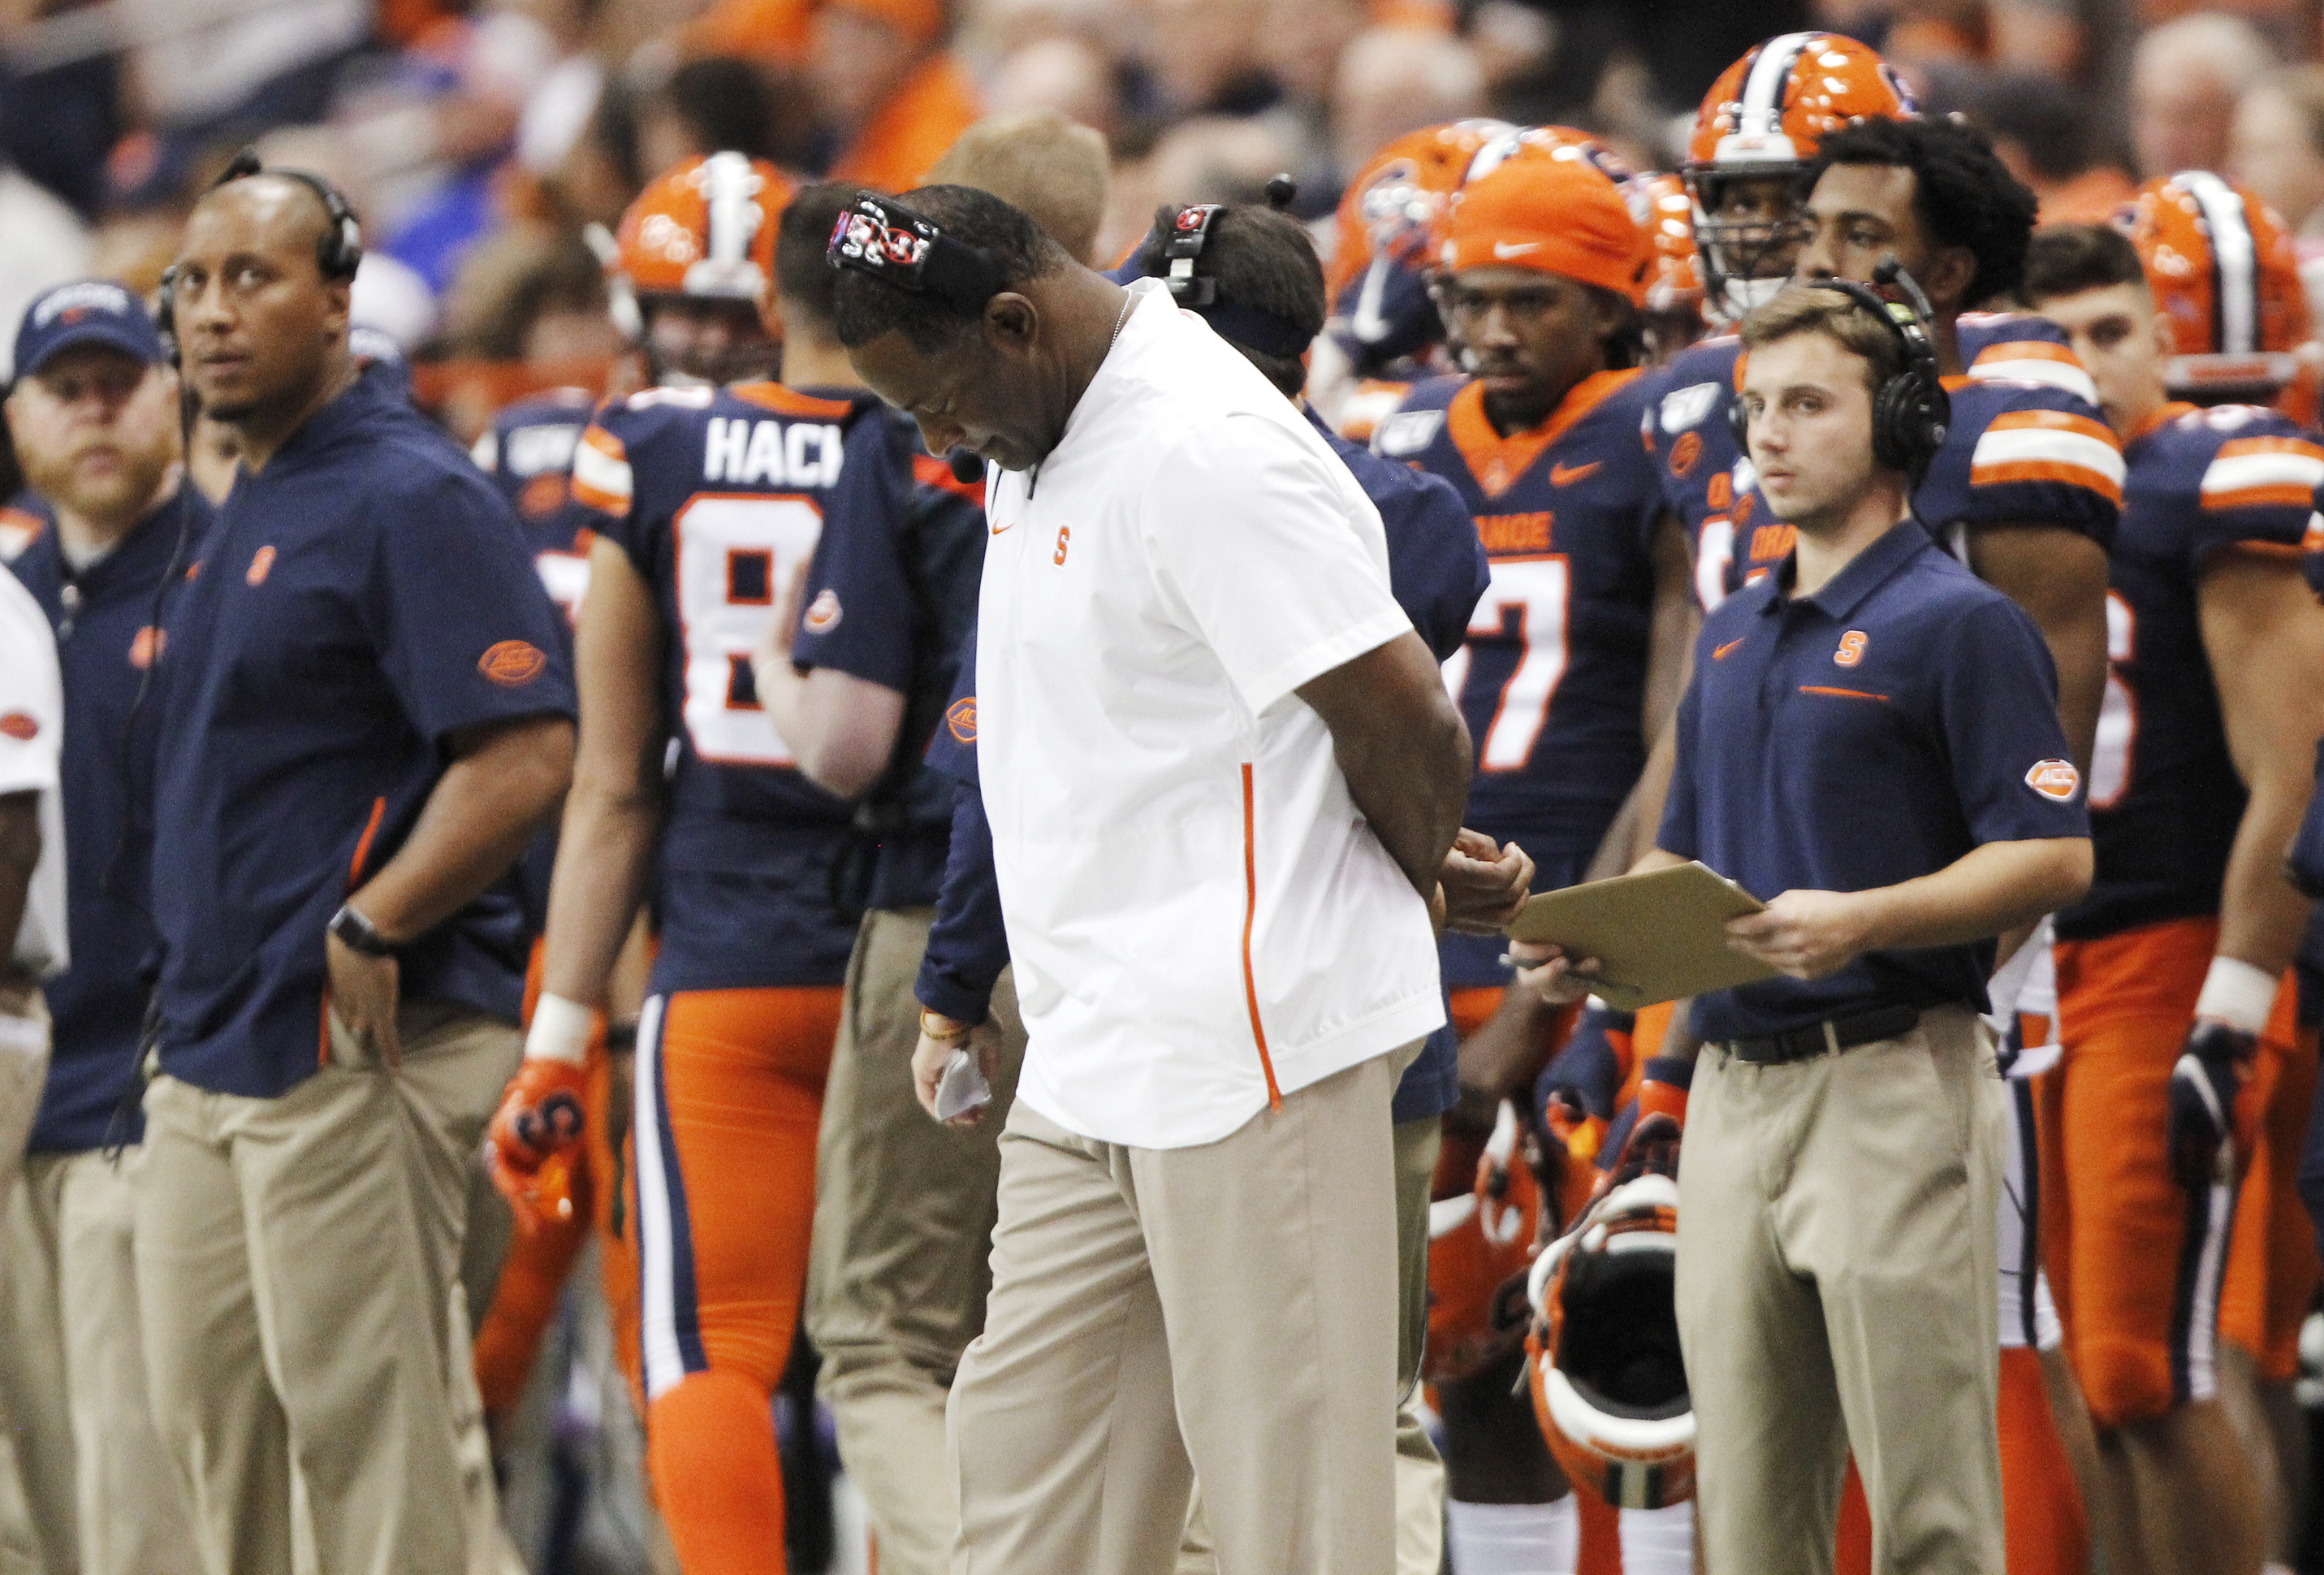 Syracuse coach Dino Babers looks down in the final minutes of the team's NCAA college football game against Pittsburgh in Syracuse, N.Y., Friday, Oct. 18, 2019. Pittsburgh won 27-20. (AP Photo/Nick Lisi)